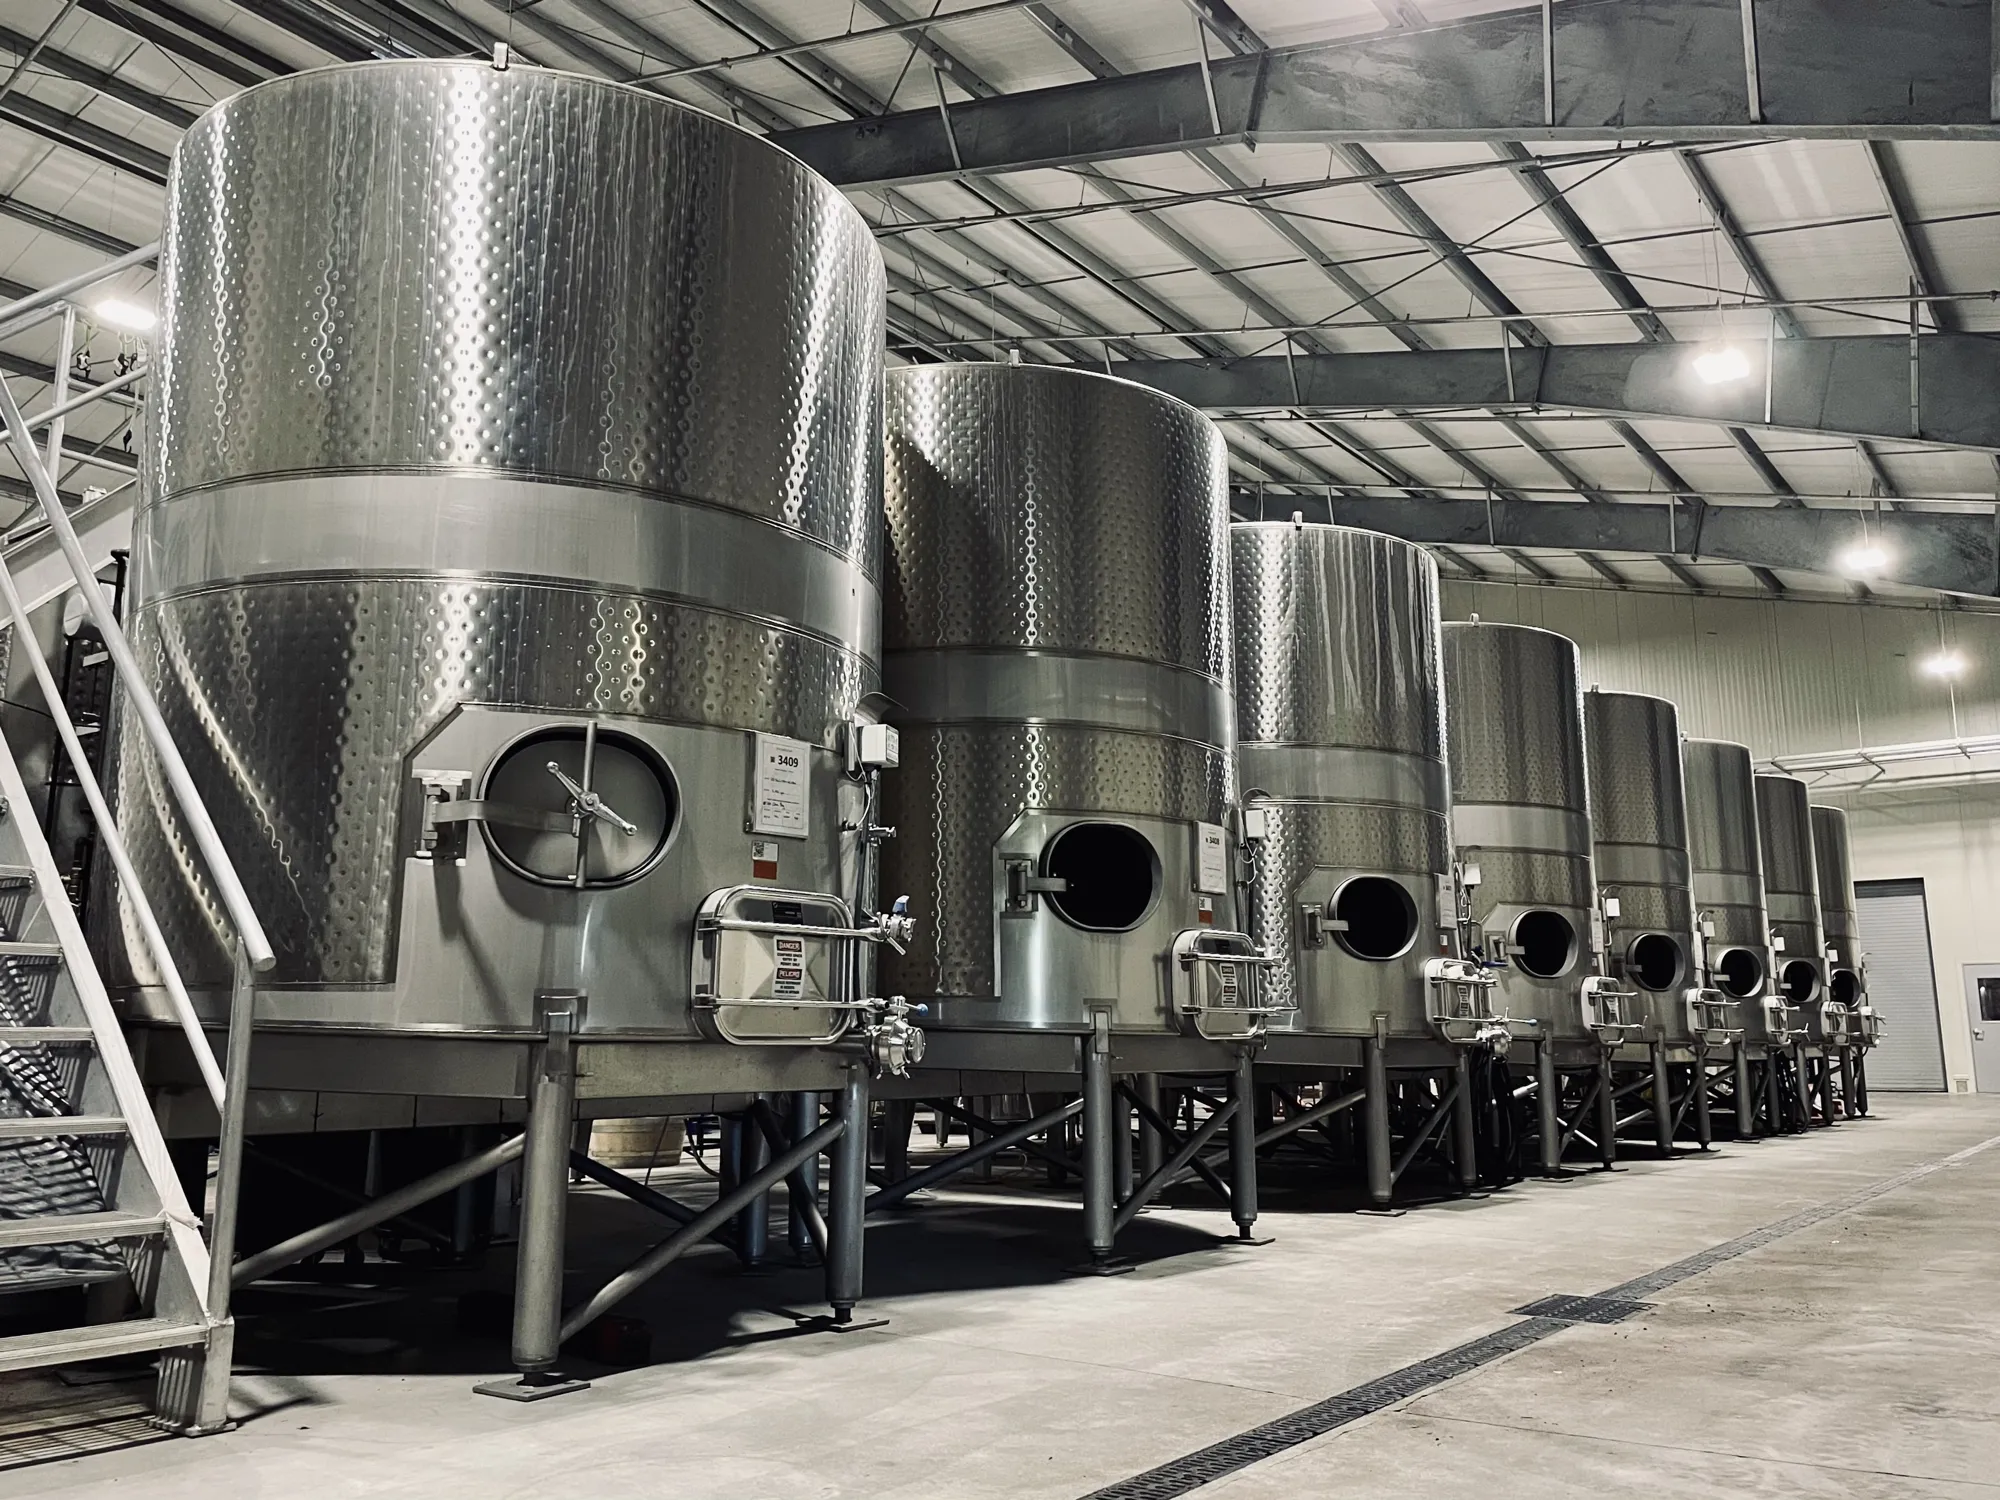 Stainless steel tanks for wine production at Sugarloaf Wine Co.